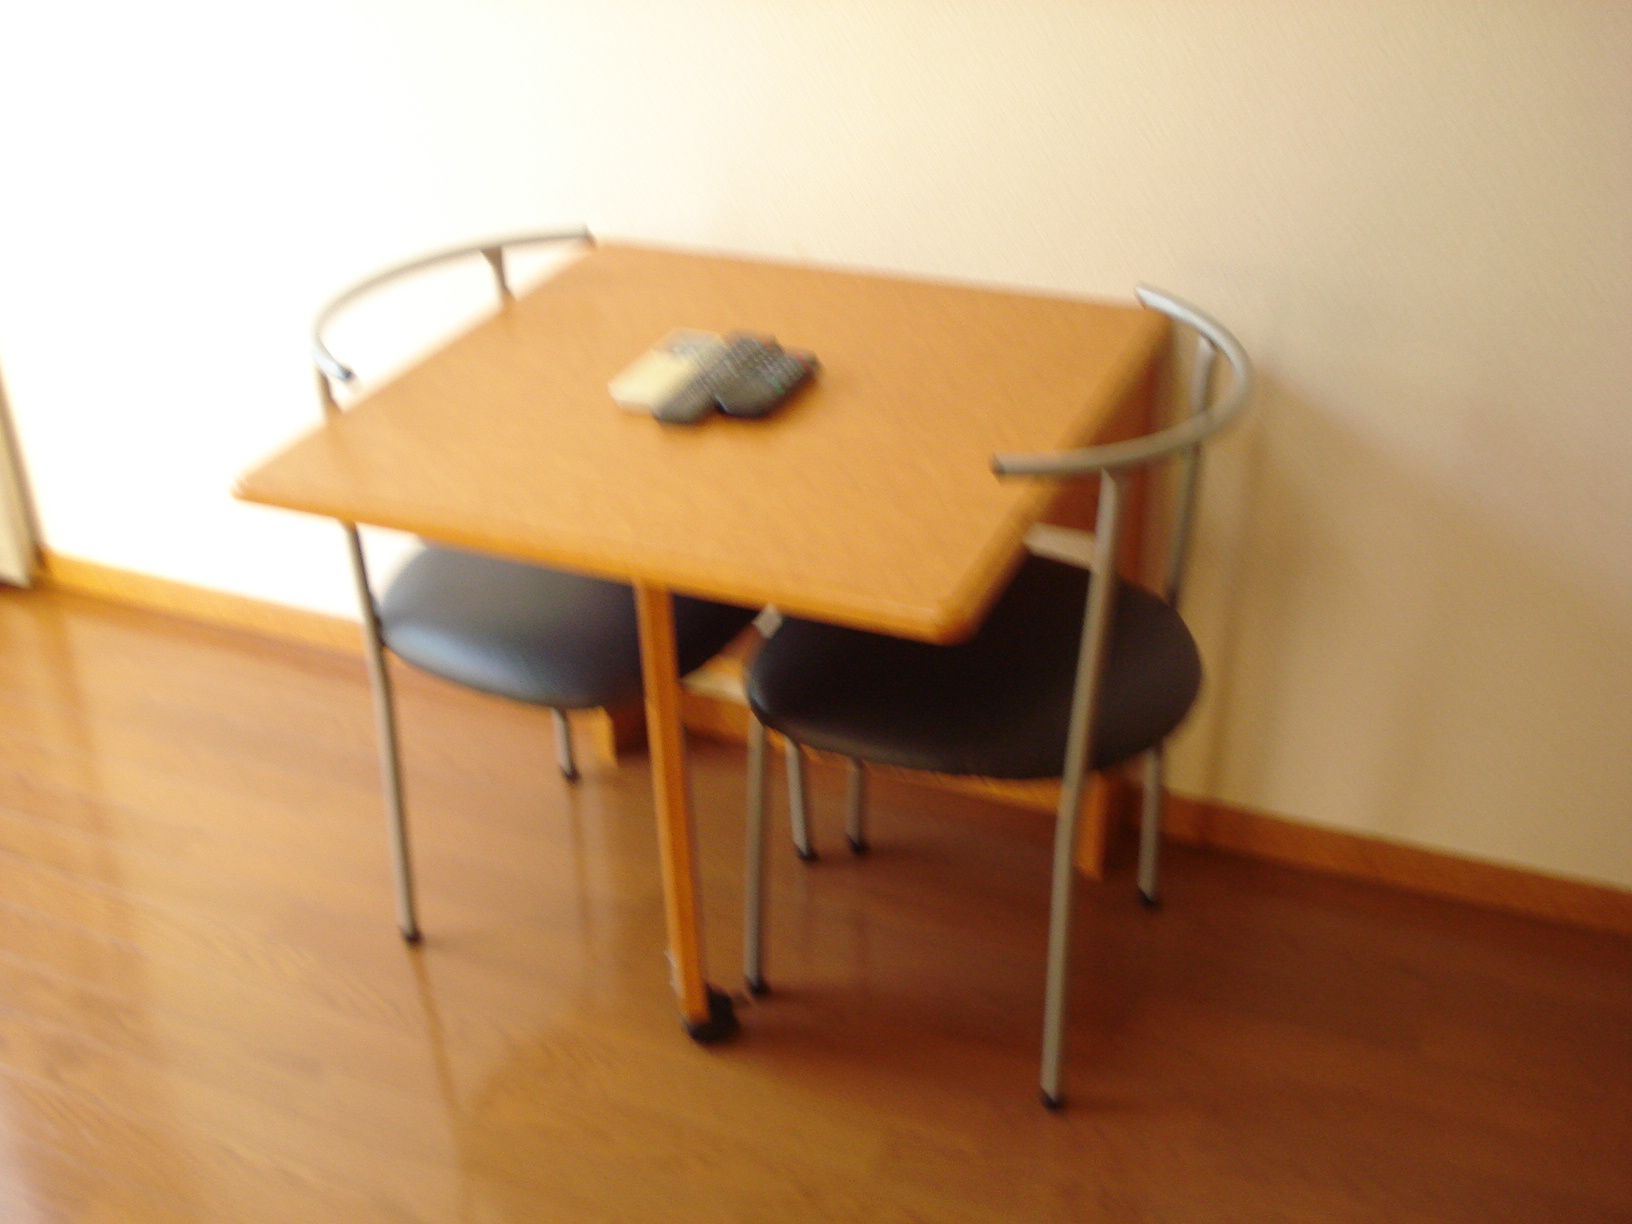 Other Equipment. Folding table